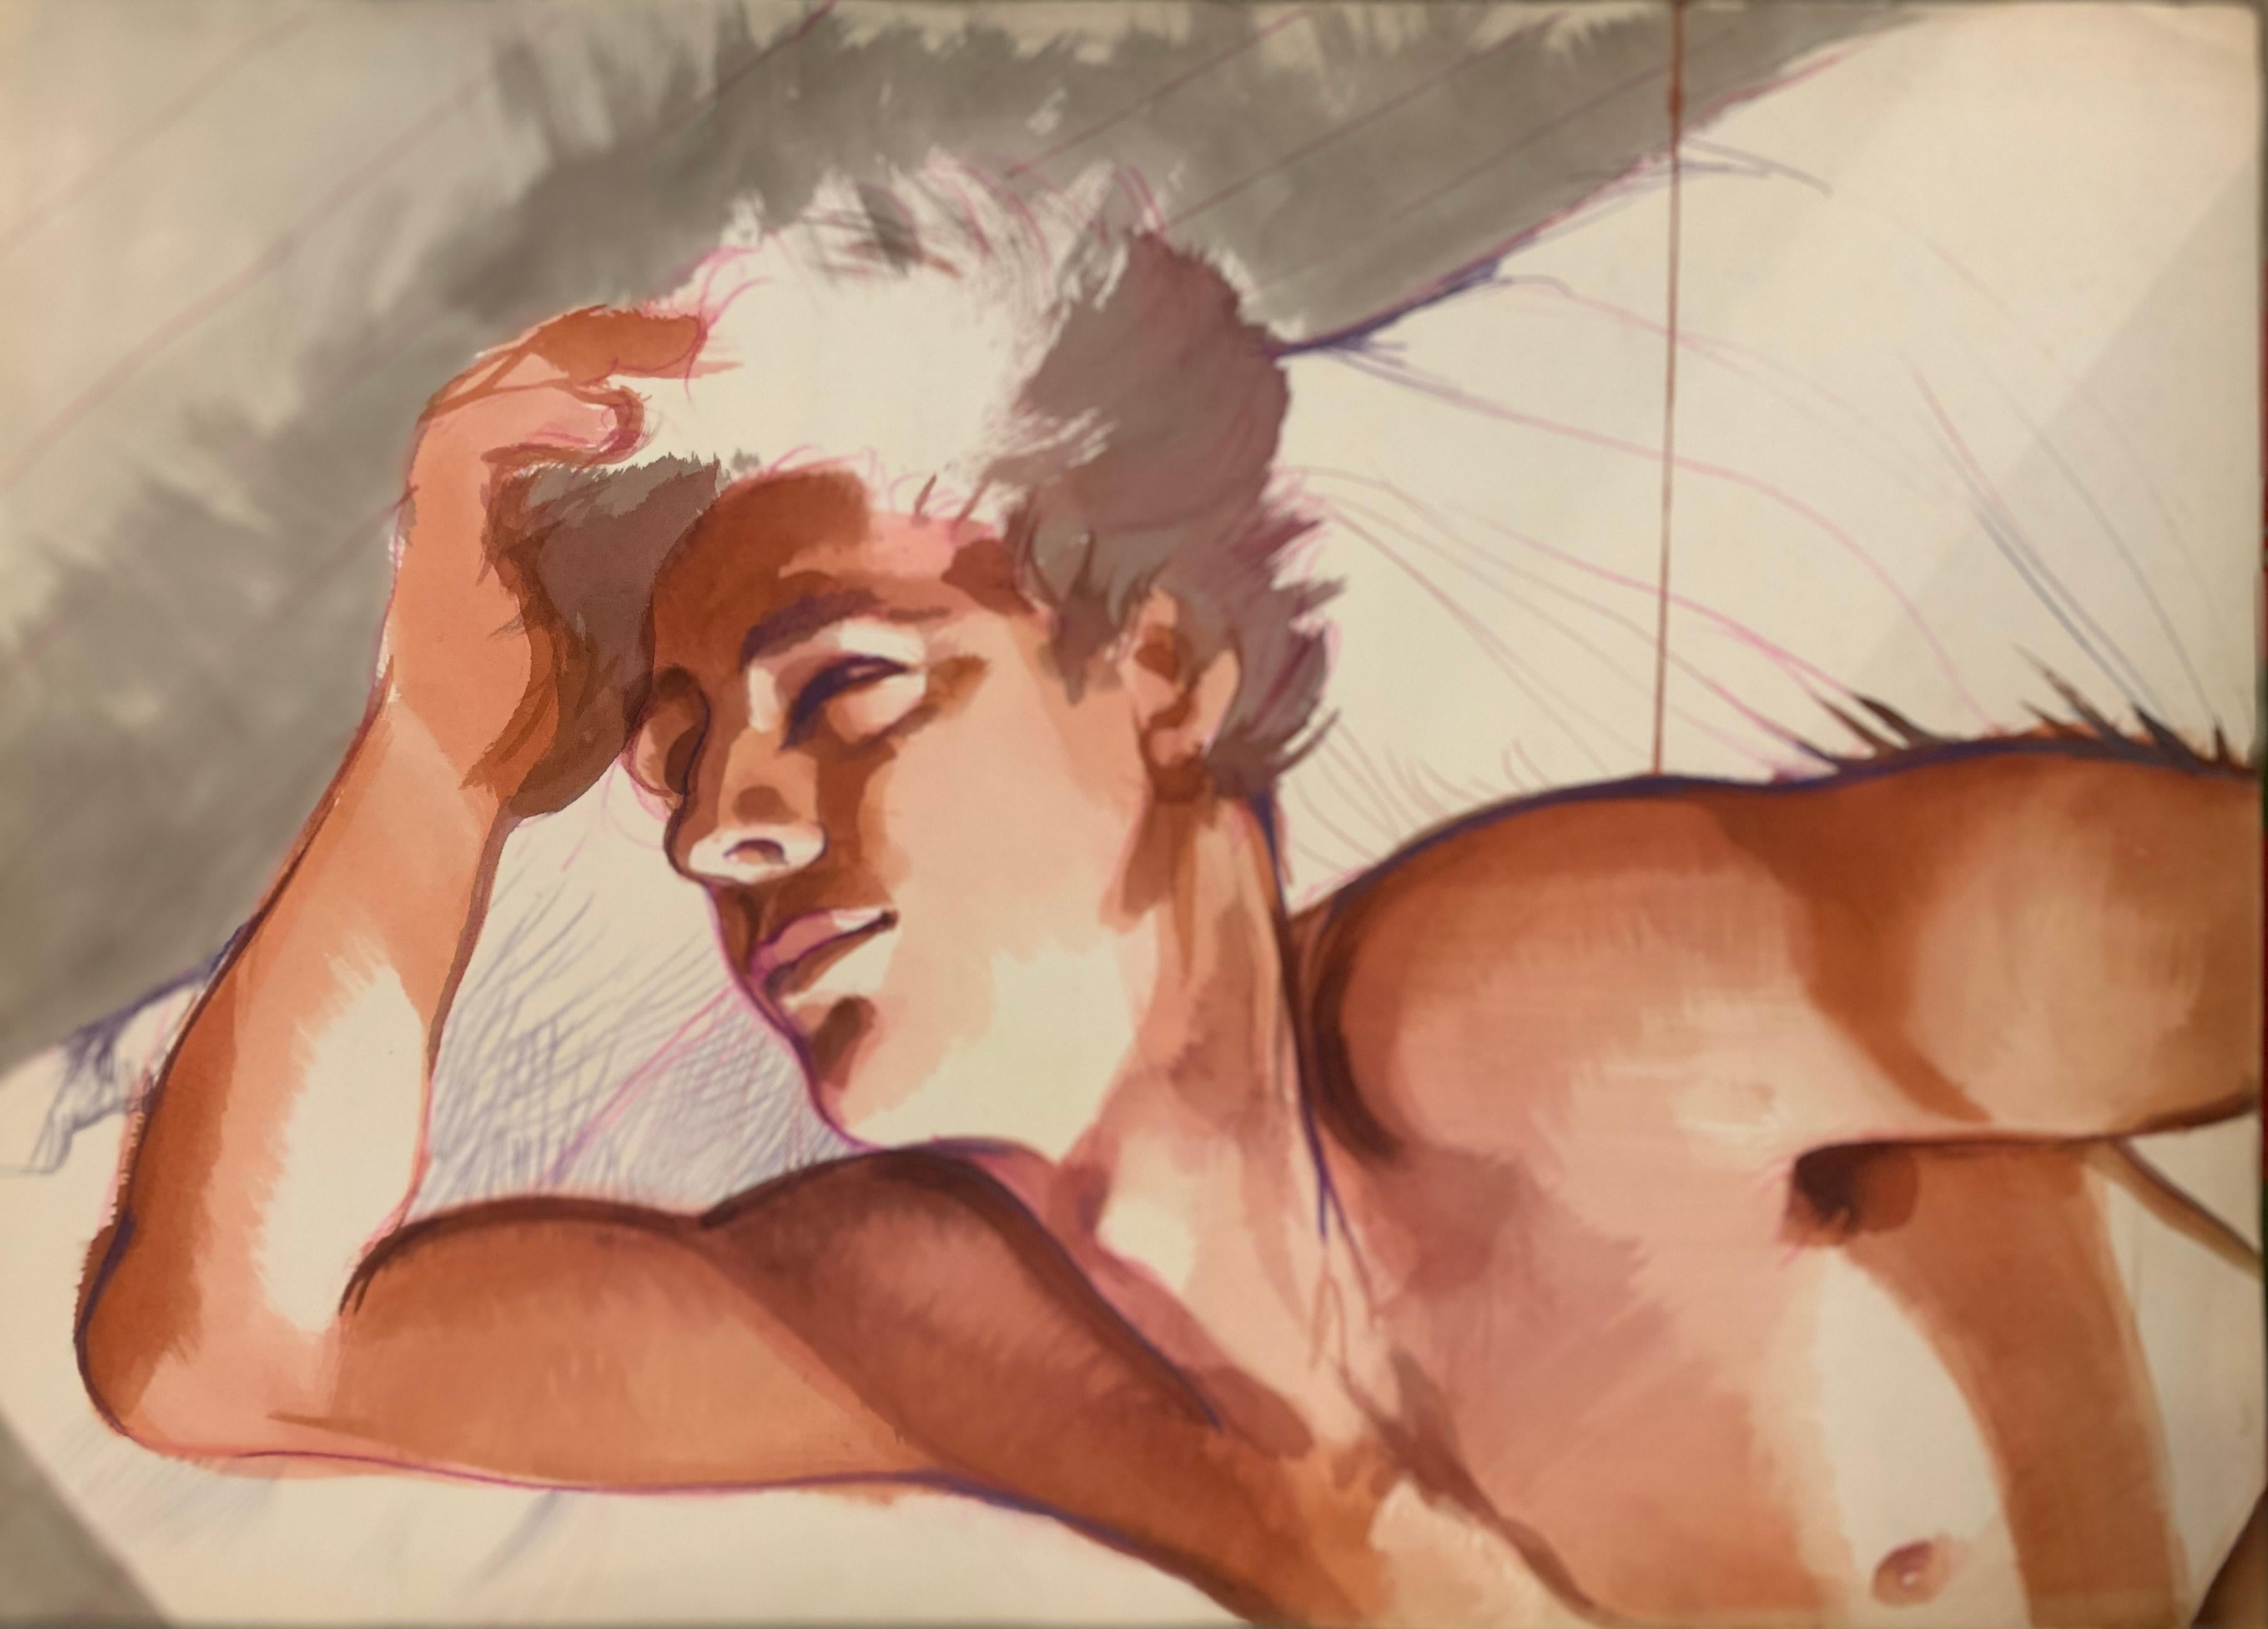 Silombria Marco Figurative Art - After waking up. Daydreaming. Large graphic painting of young male nude. 